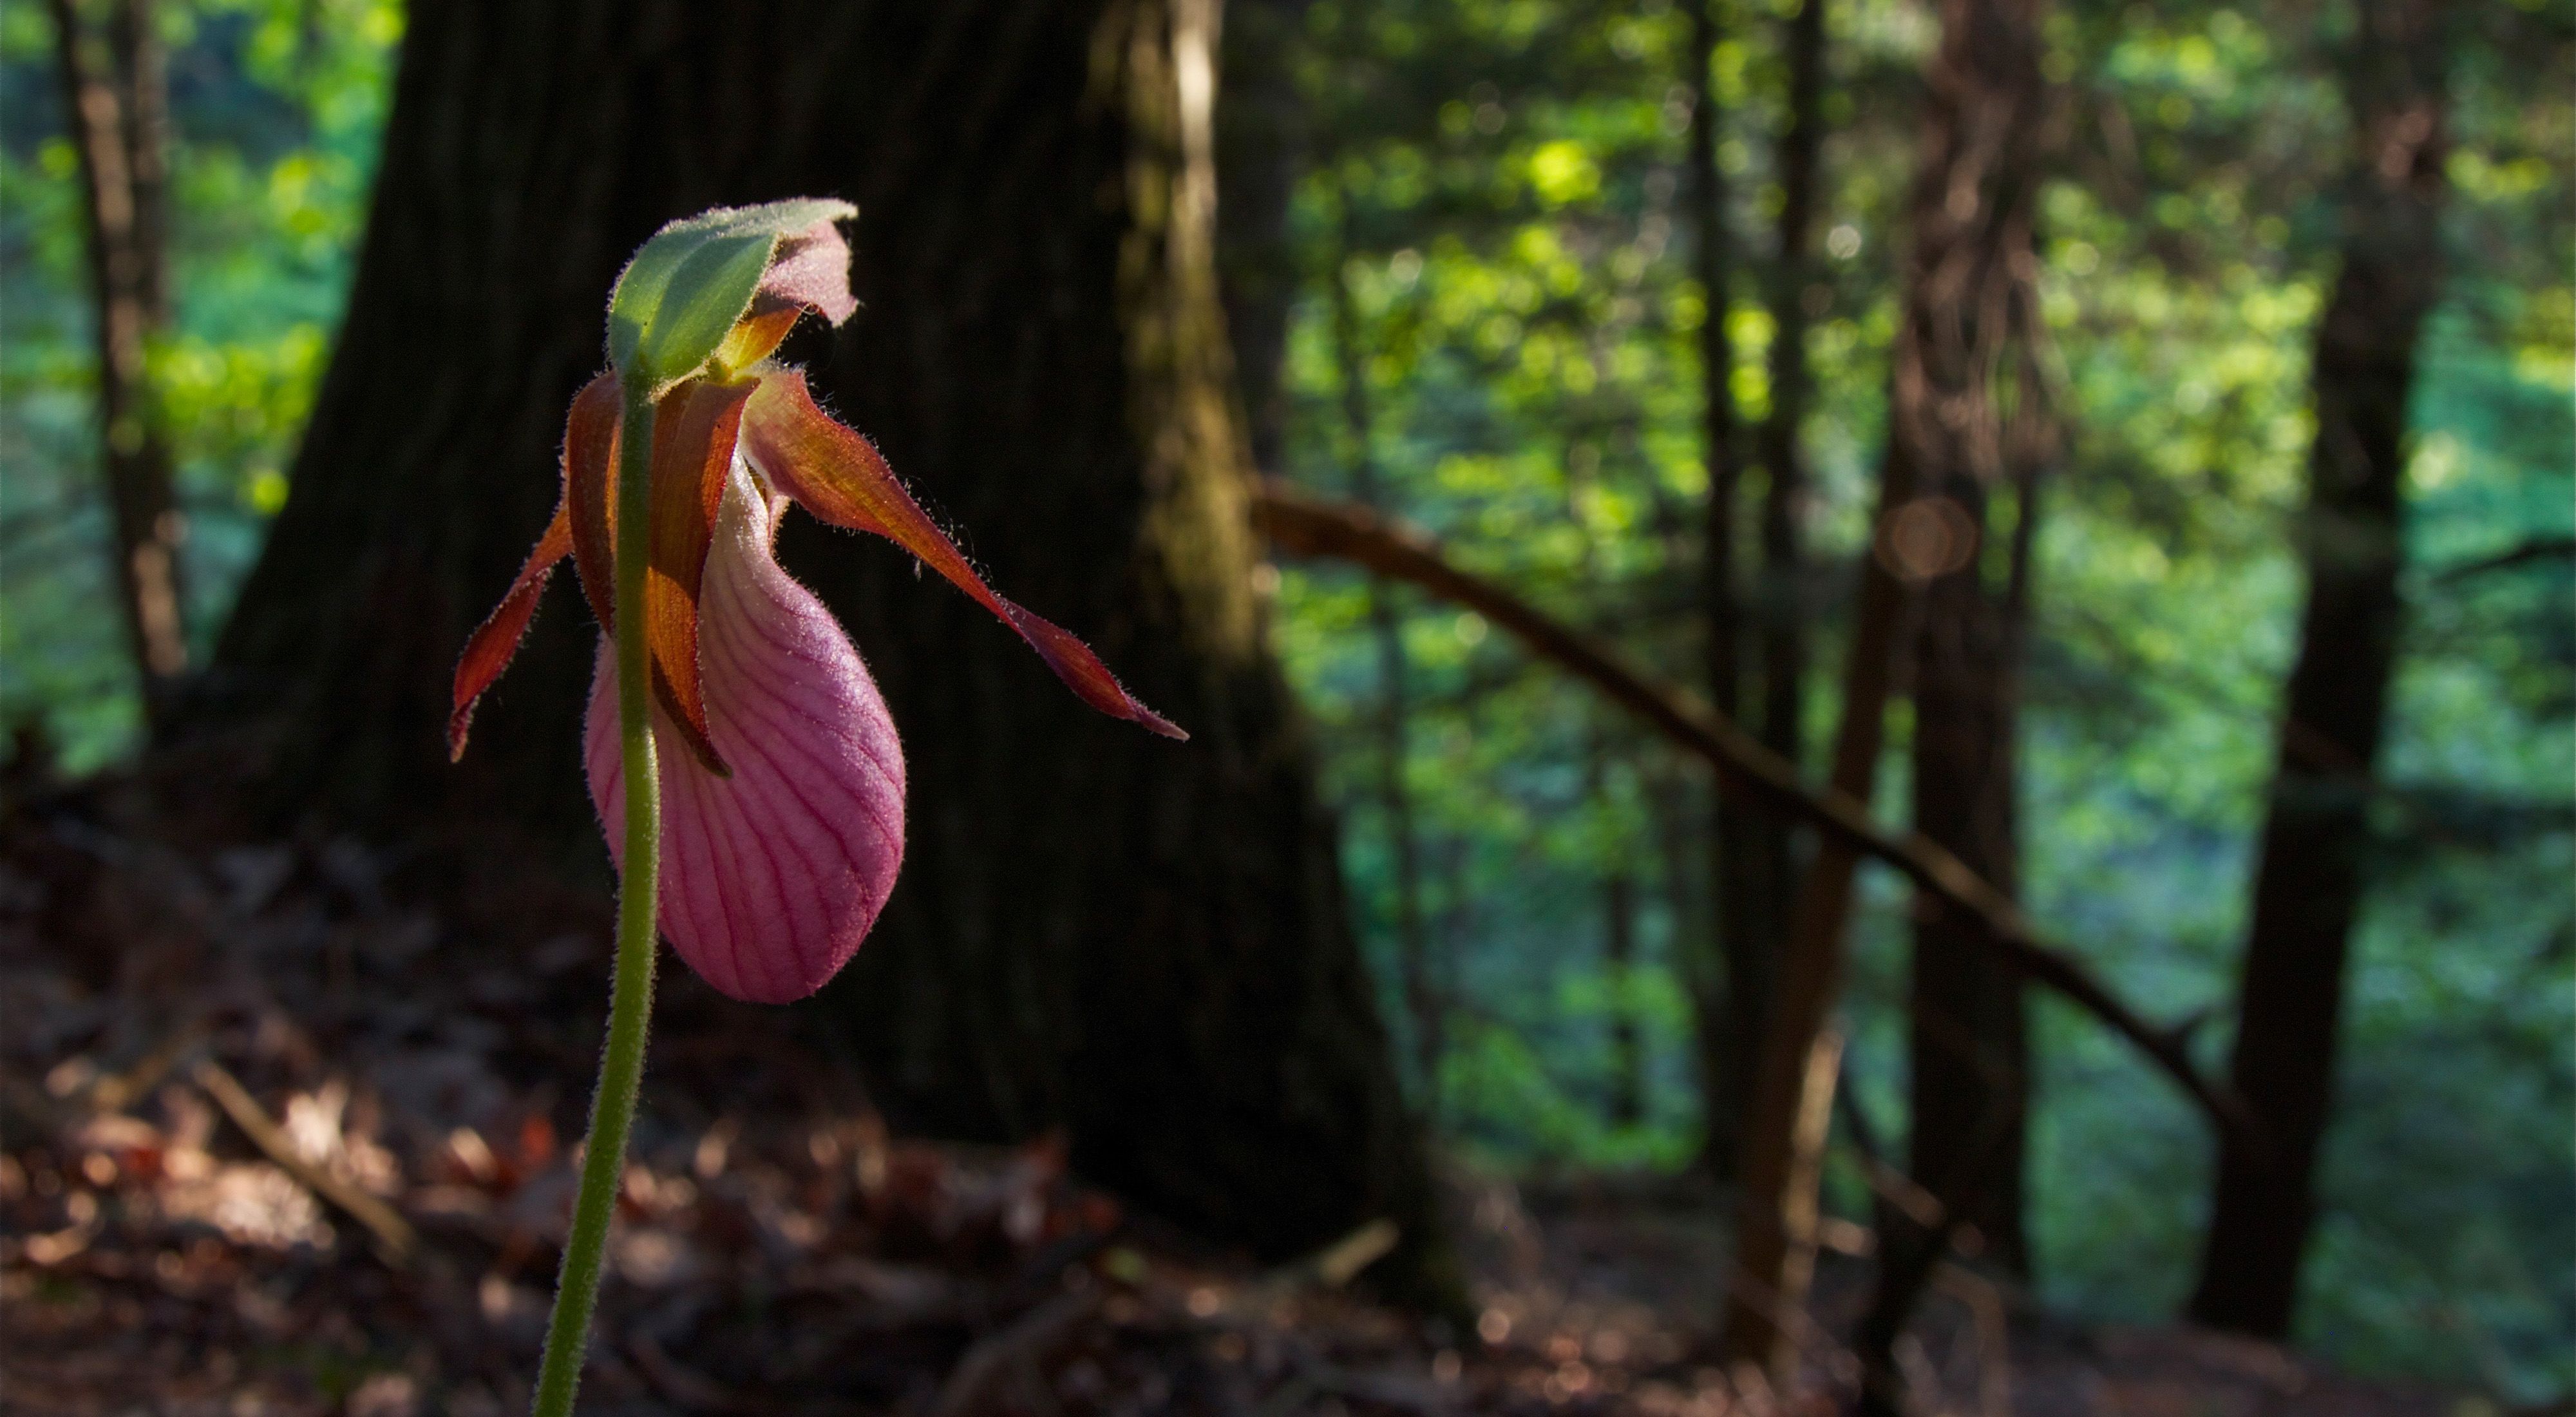 In the foreground, the delicate pink blossom of a lady's slipper orchid. Mature trees grow in the shaded forest in the background.